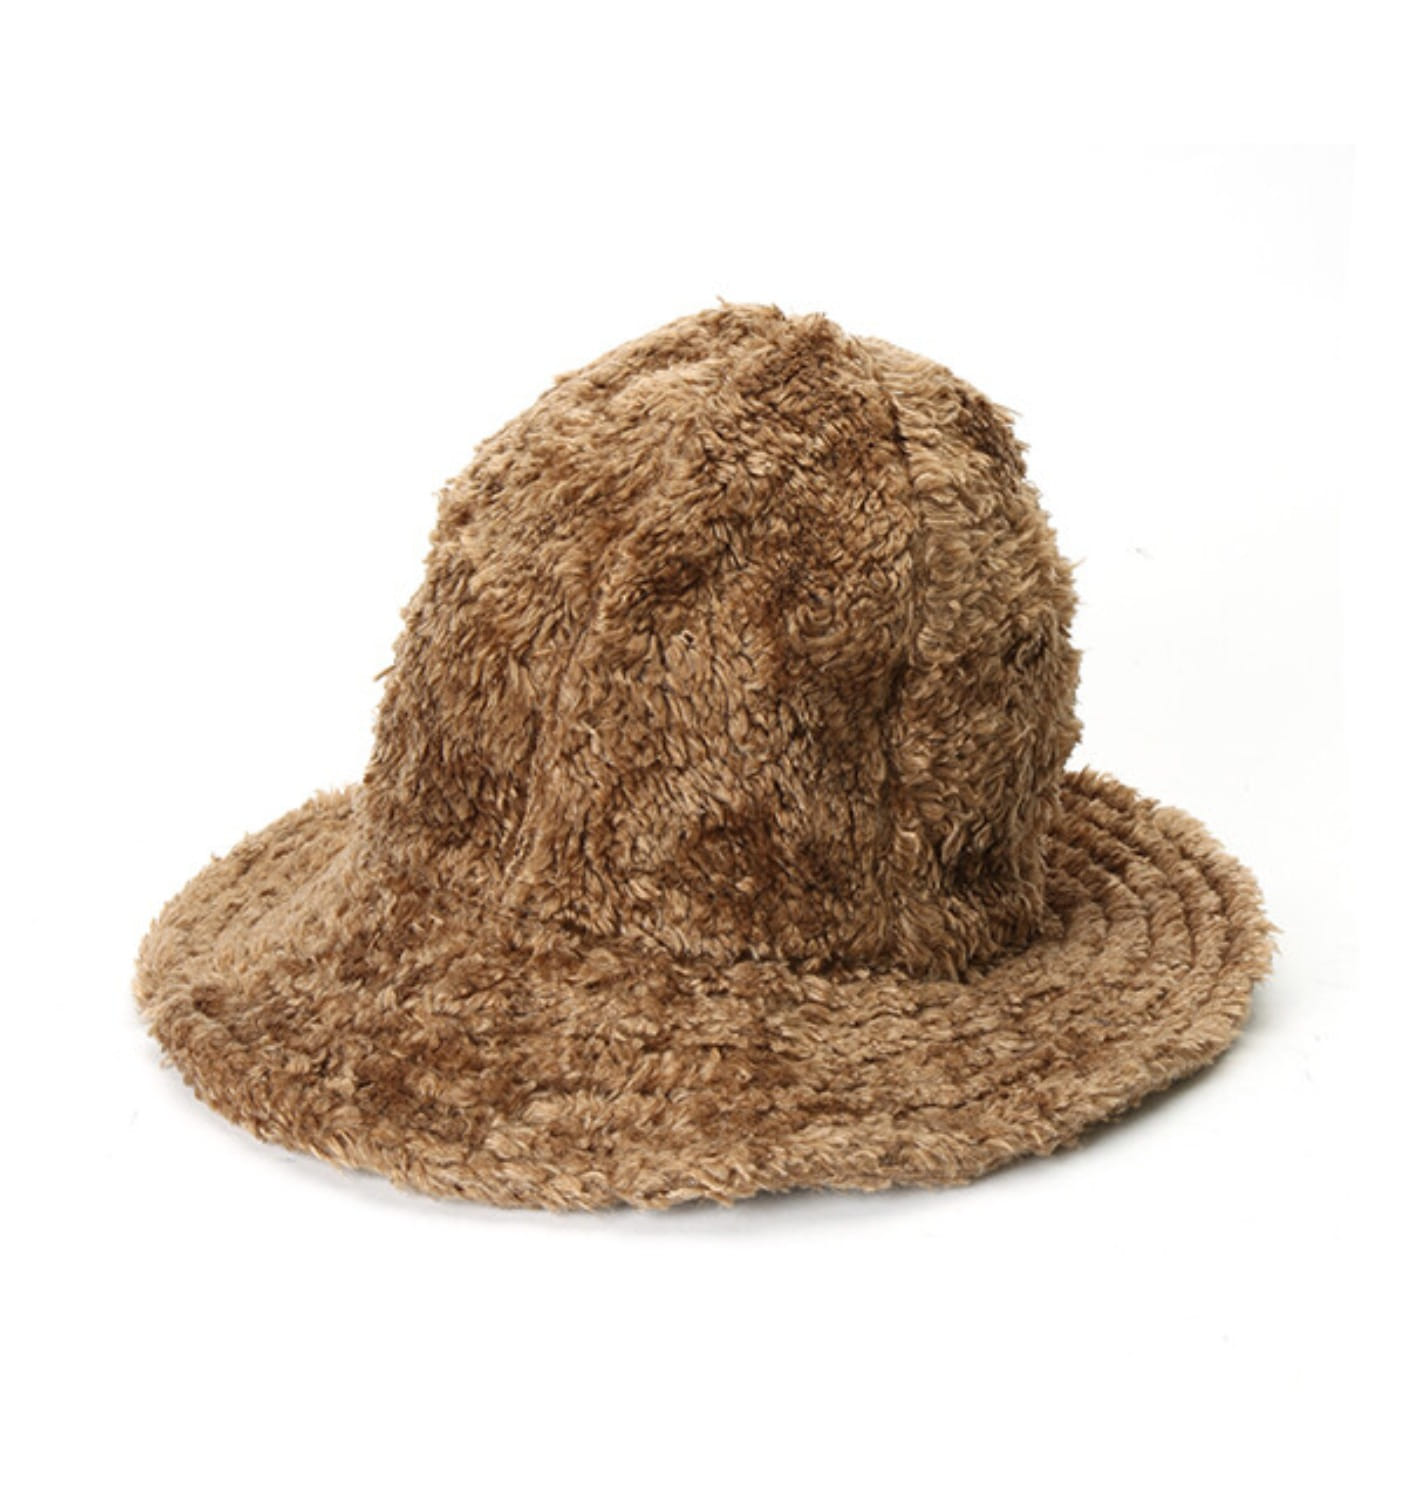 DOME HAT BROWN CURLY